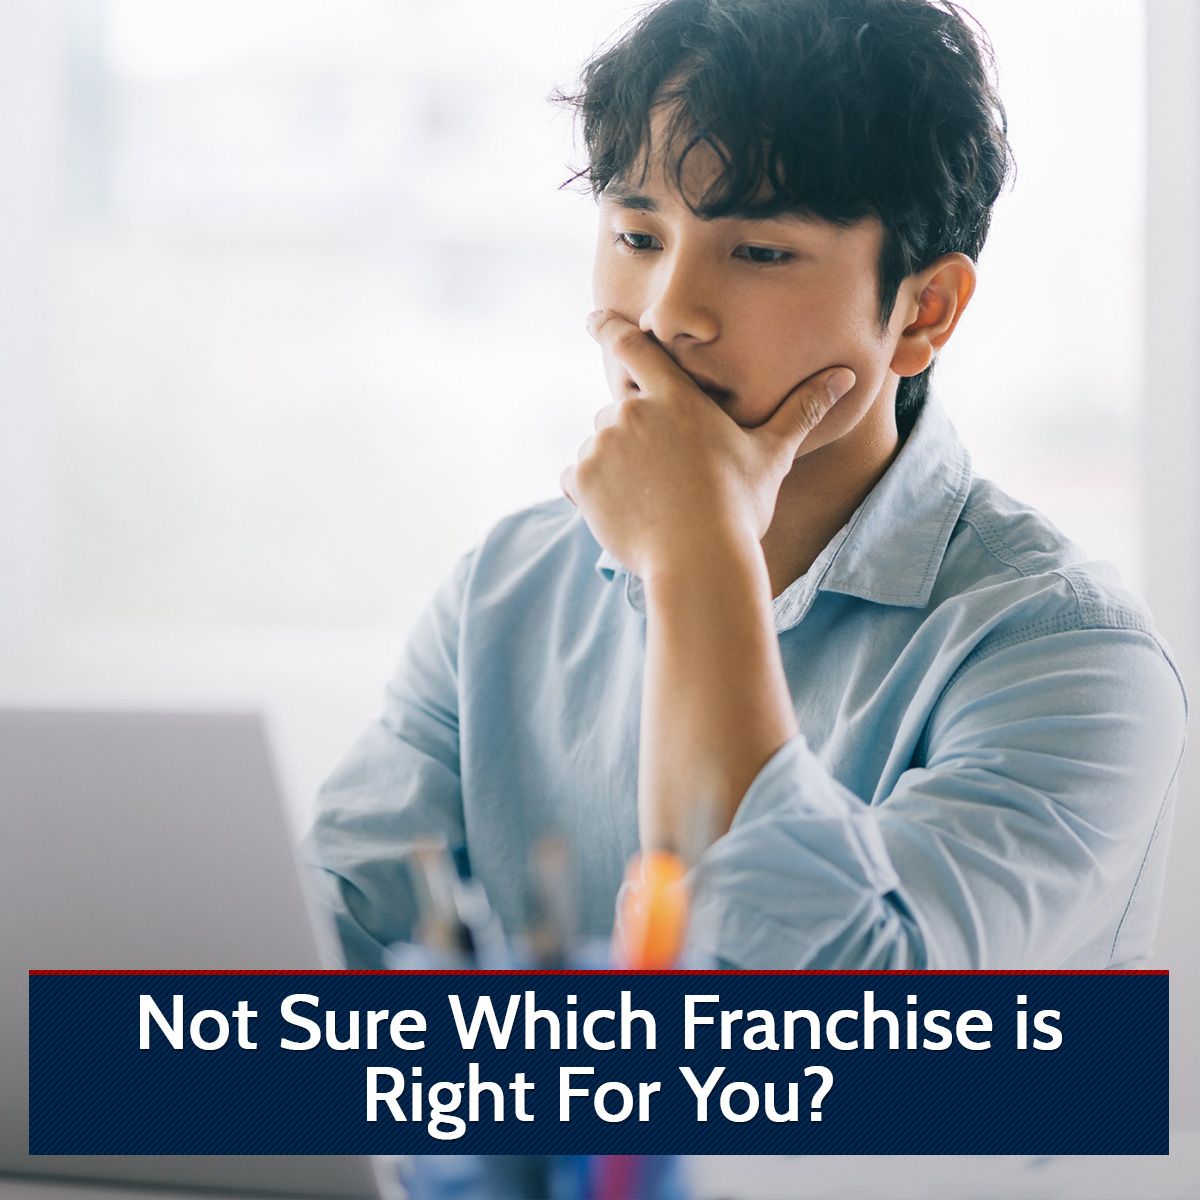 Not Sure Which Franchise is Right For You?